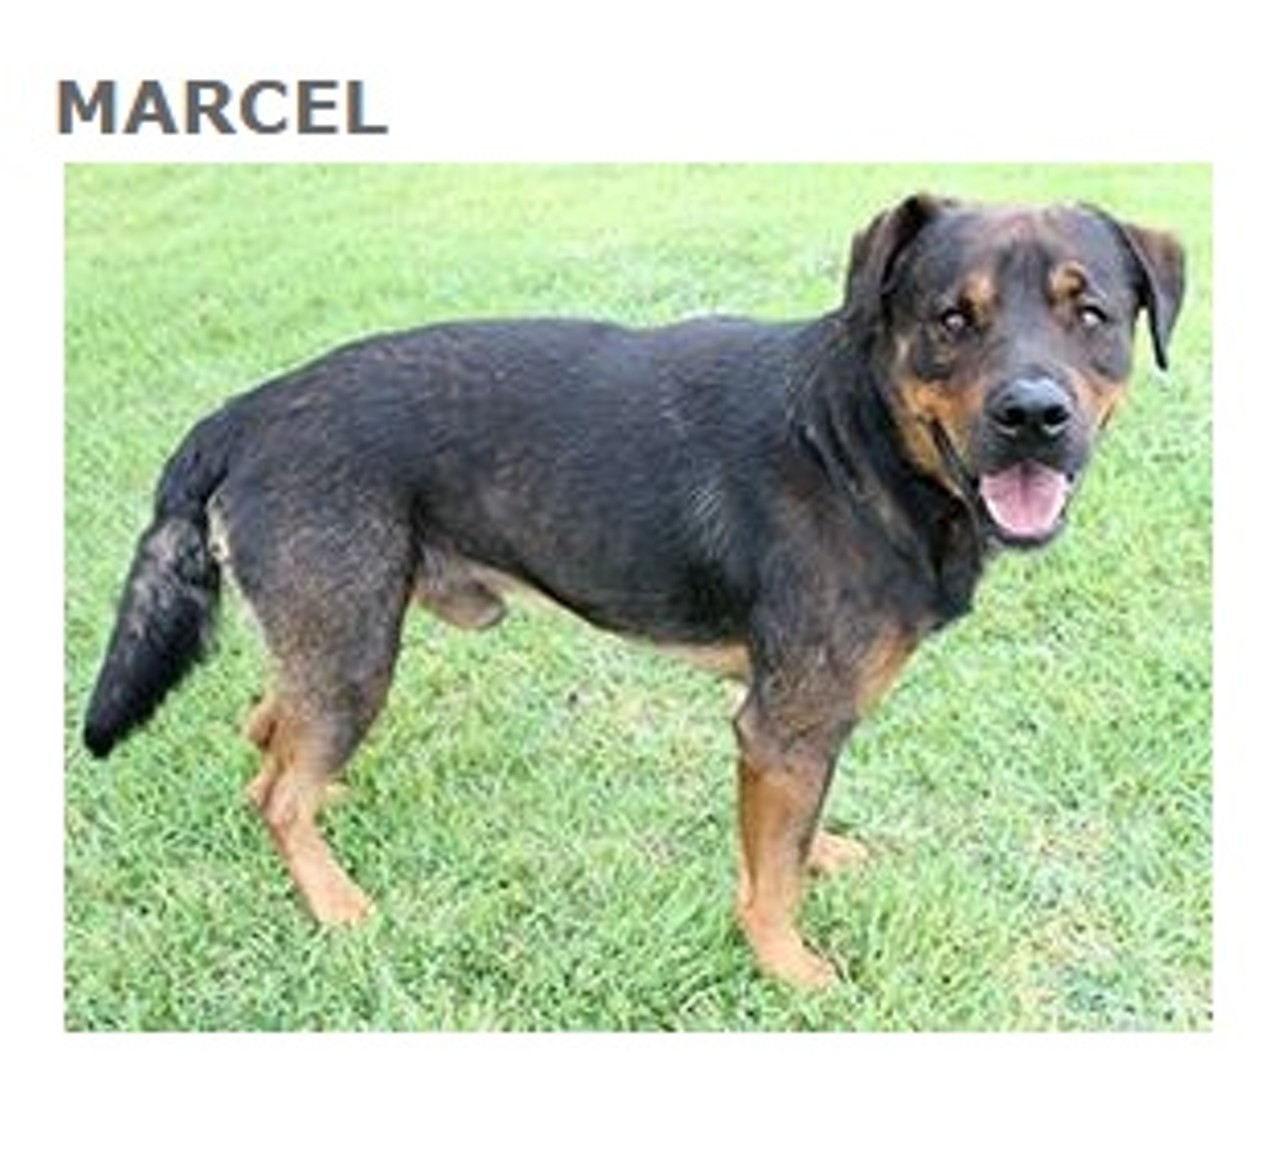 Marcel Is a black and brown Rottweiler Mix, he is about 5 years and 9 months old. He currently lives at the San Antonio Humane Society (ID #23587318). He and other cool pets like him will be available for adoption this Saturday May 23rd at Bark in the Park&#151;Perrito Grito at Rosedale Park